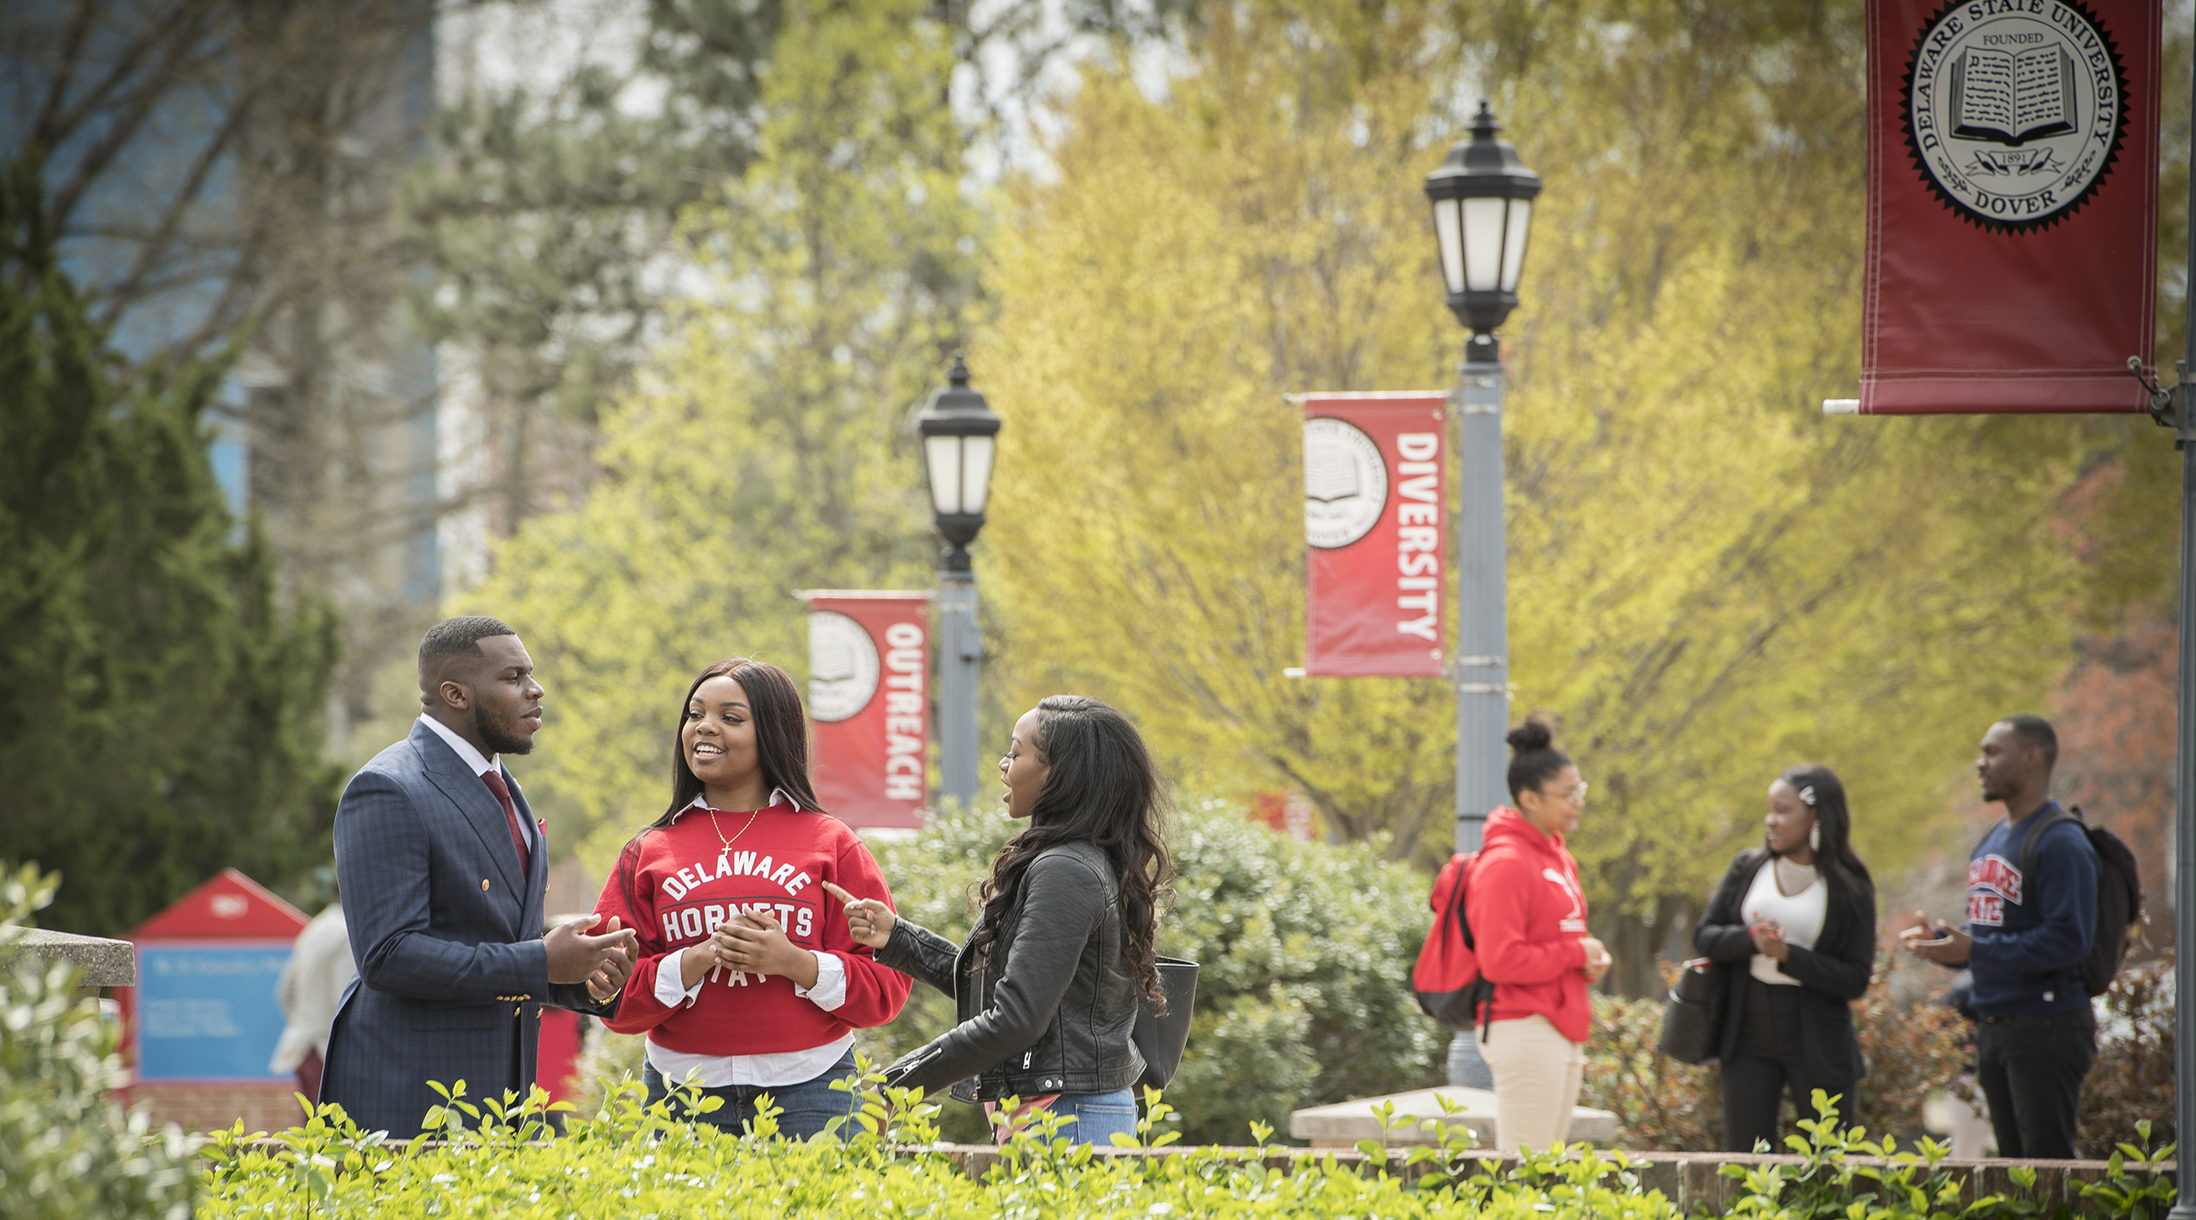 With a total enrollment of 5,054 students for the 2019-2020 academic year, Delaware State University has broken all prior enrollment records for the ninth time in ten years.